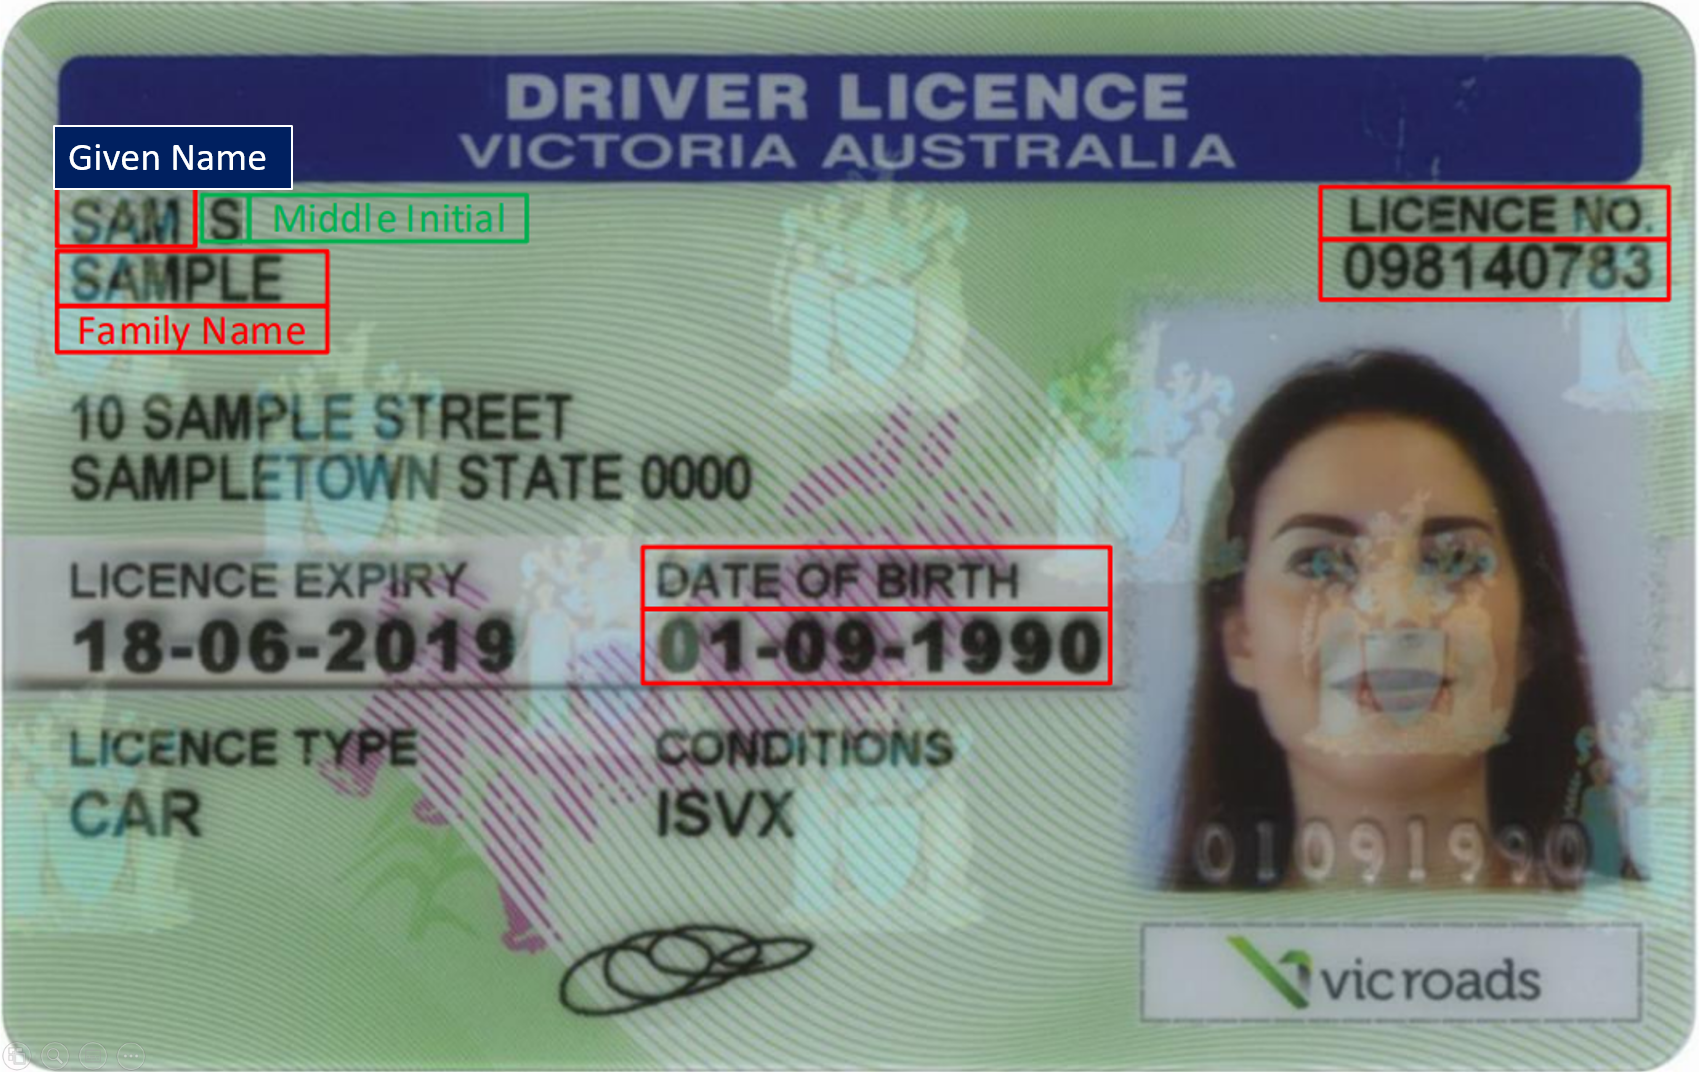 Image shows a Victorian Driver Licence with red boxes highlighting the Given Name, Family Name, Licence Number and Date of Birth fields.